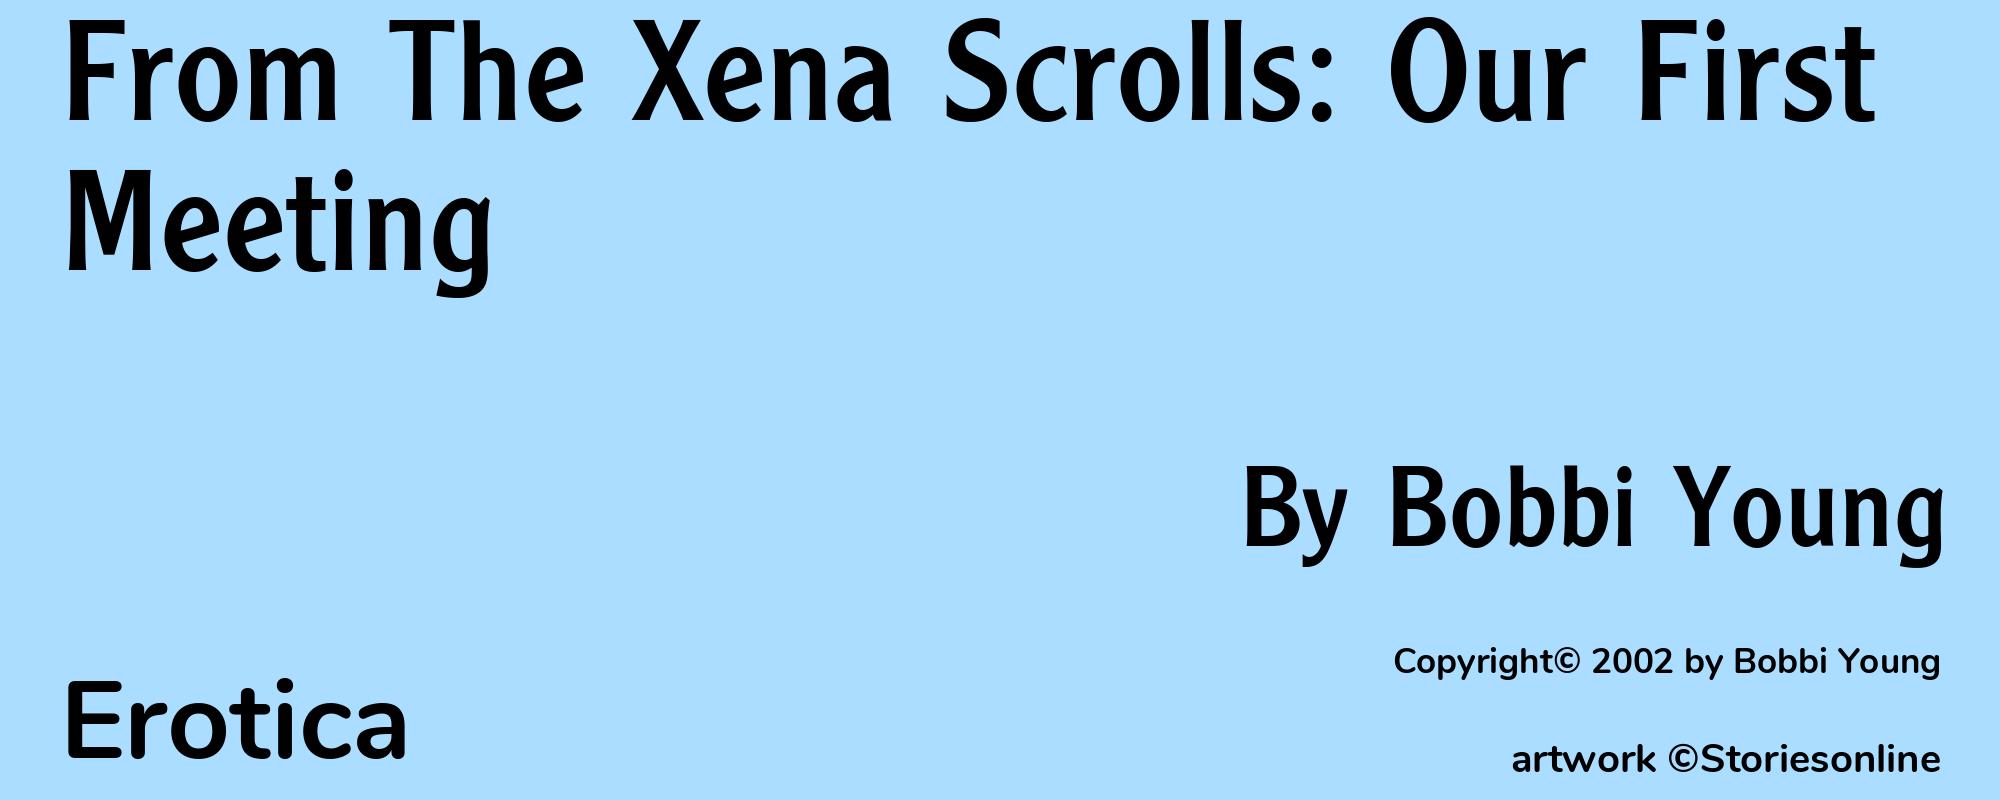 From The Xena Scrolls: Our First Meeting - Cover